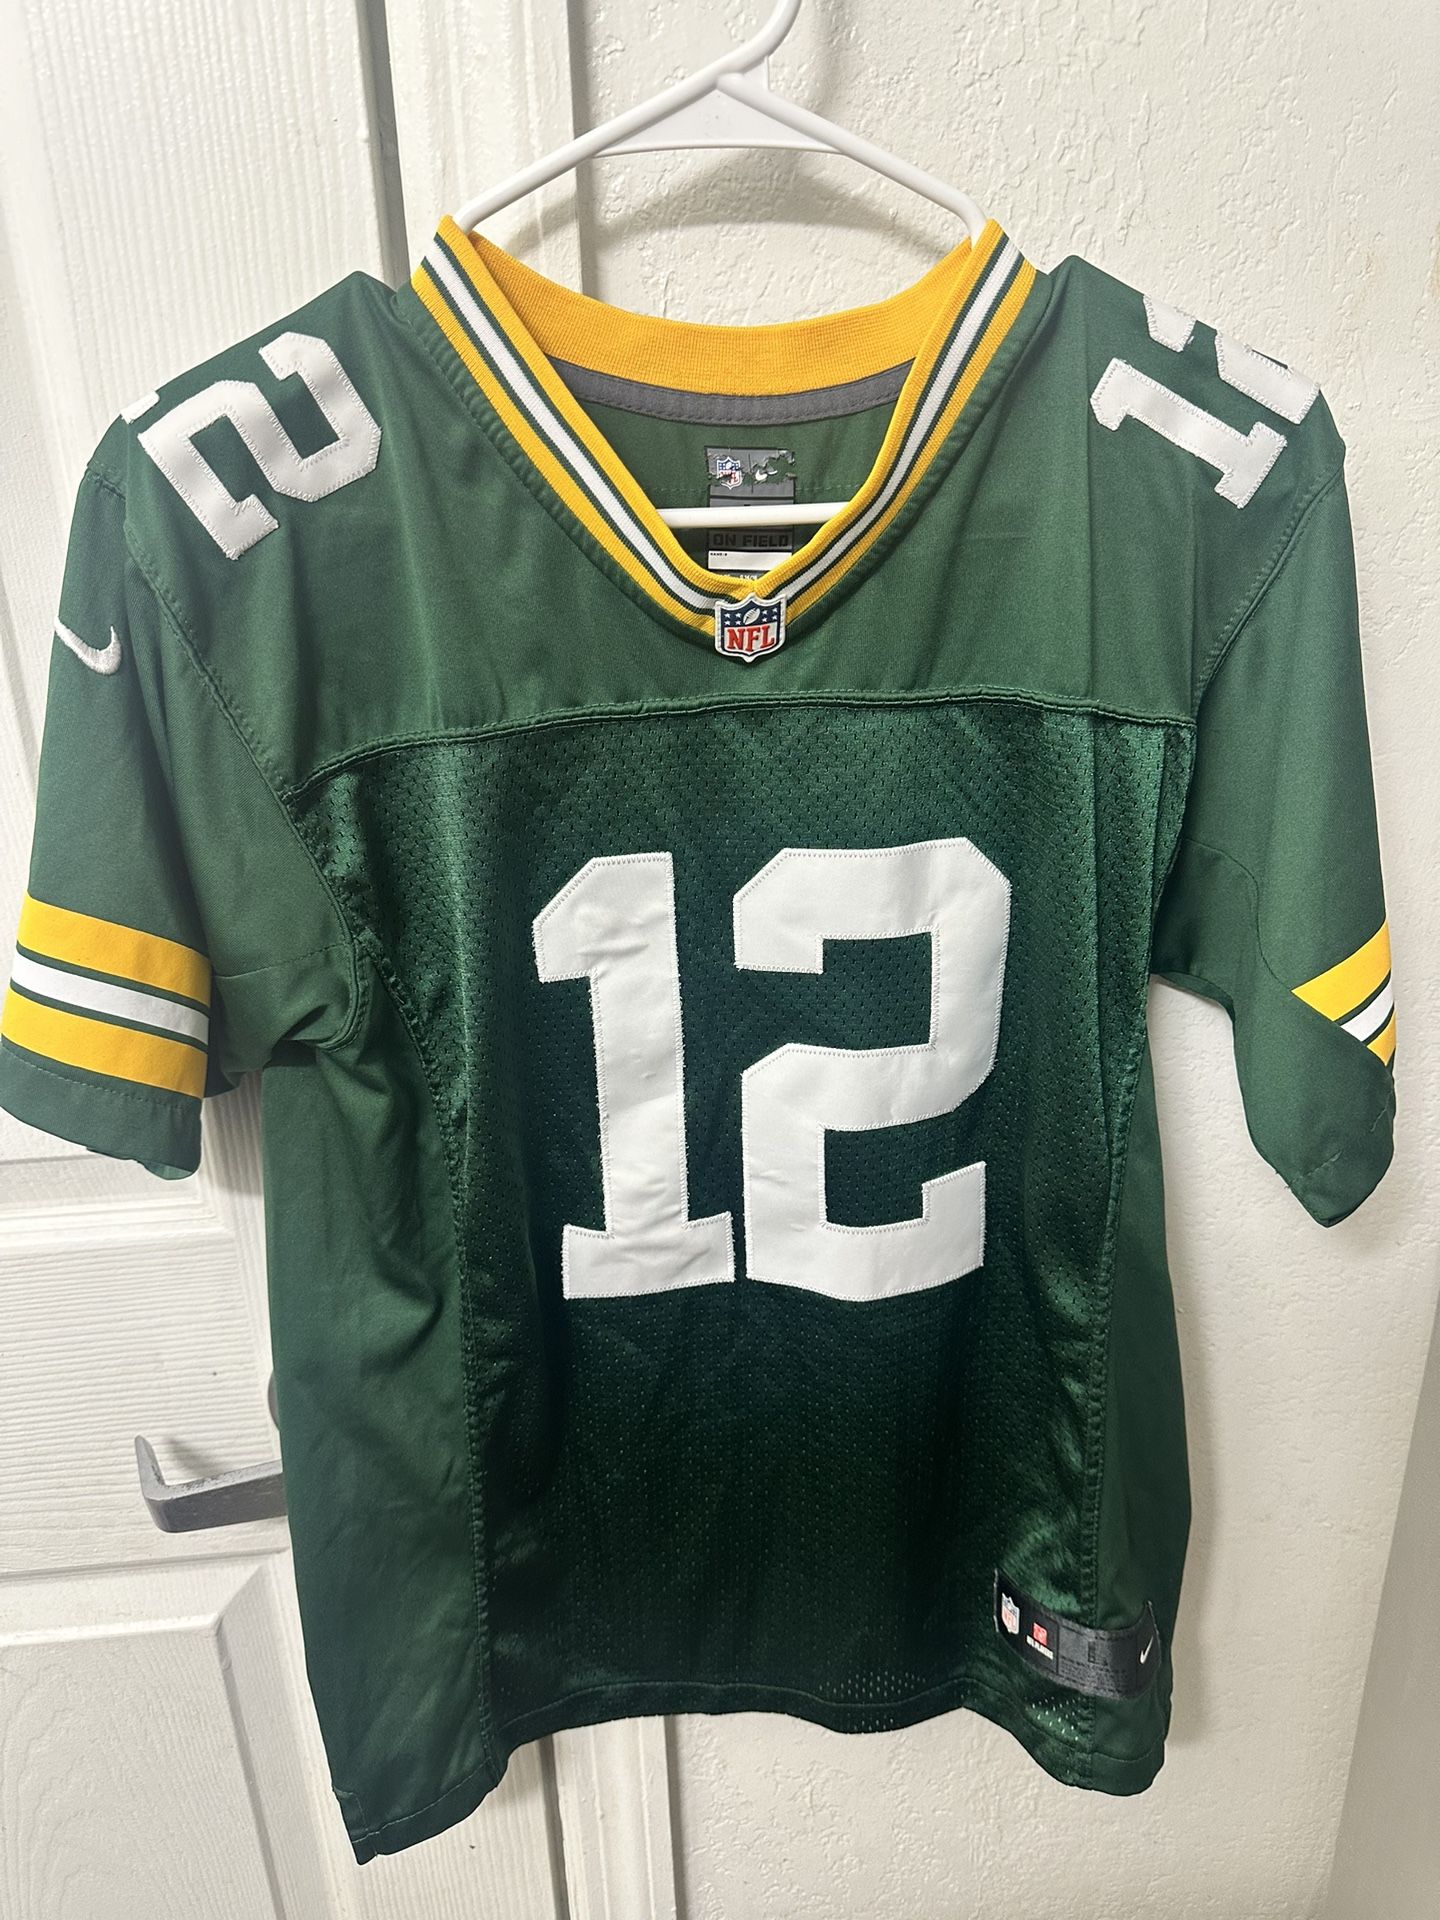 Green Bay Packers Jersey Aaron Rodgers Nike